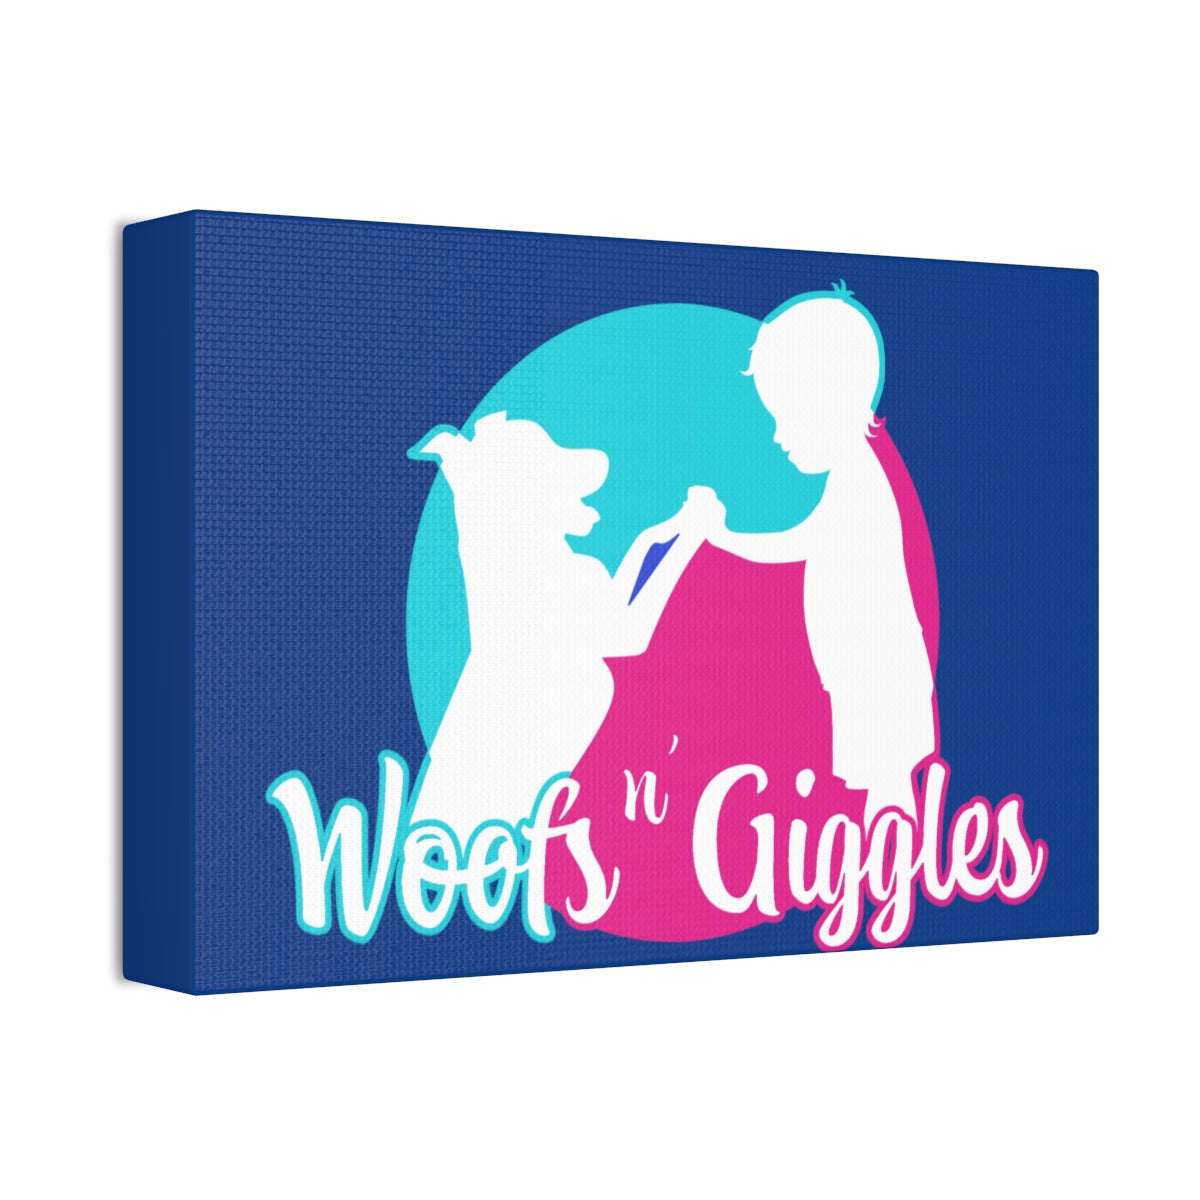 Woofs n' Giggles Canvas